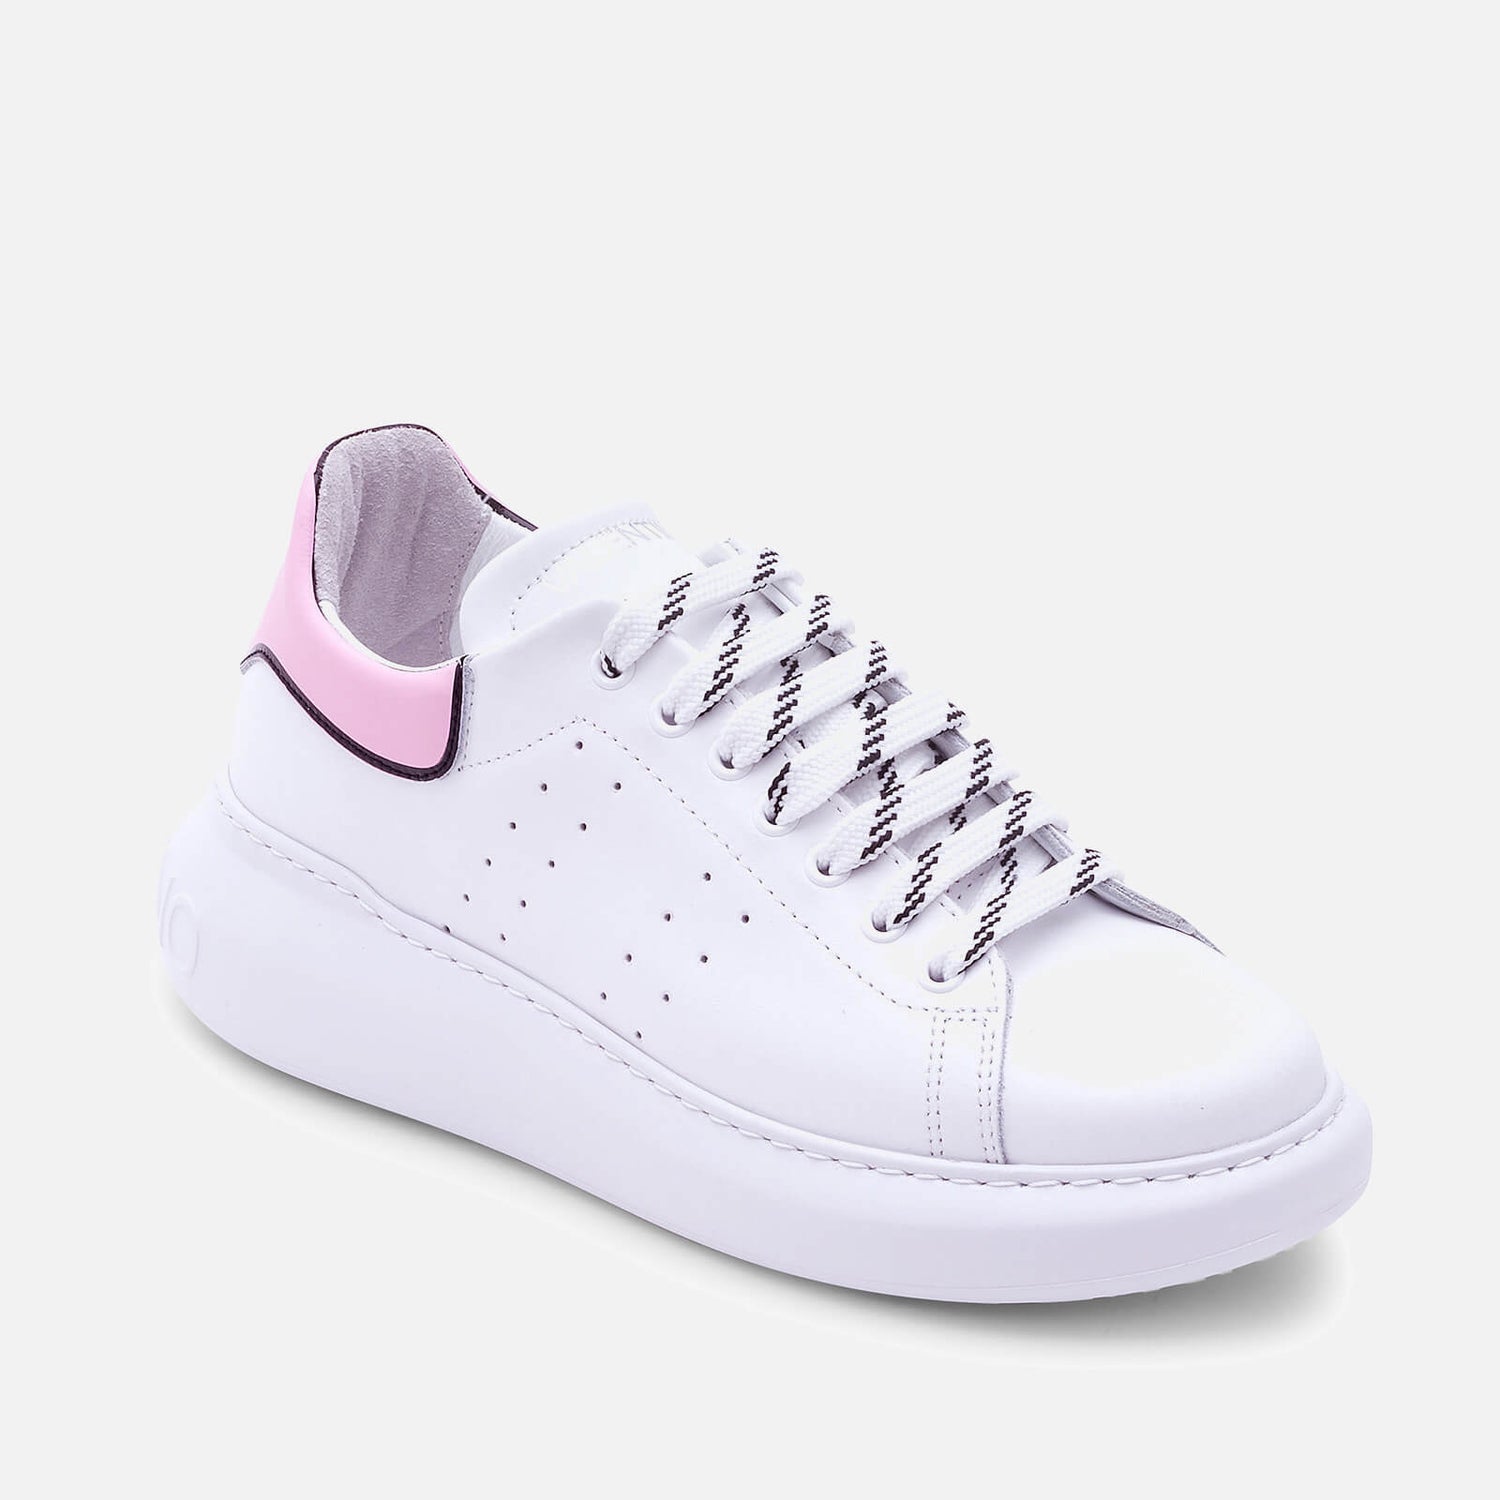 Valentino Shoes Women's Leather Chunky Trainers - White/Pink